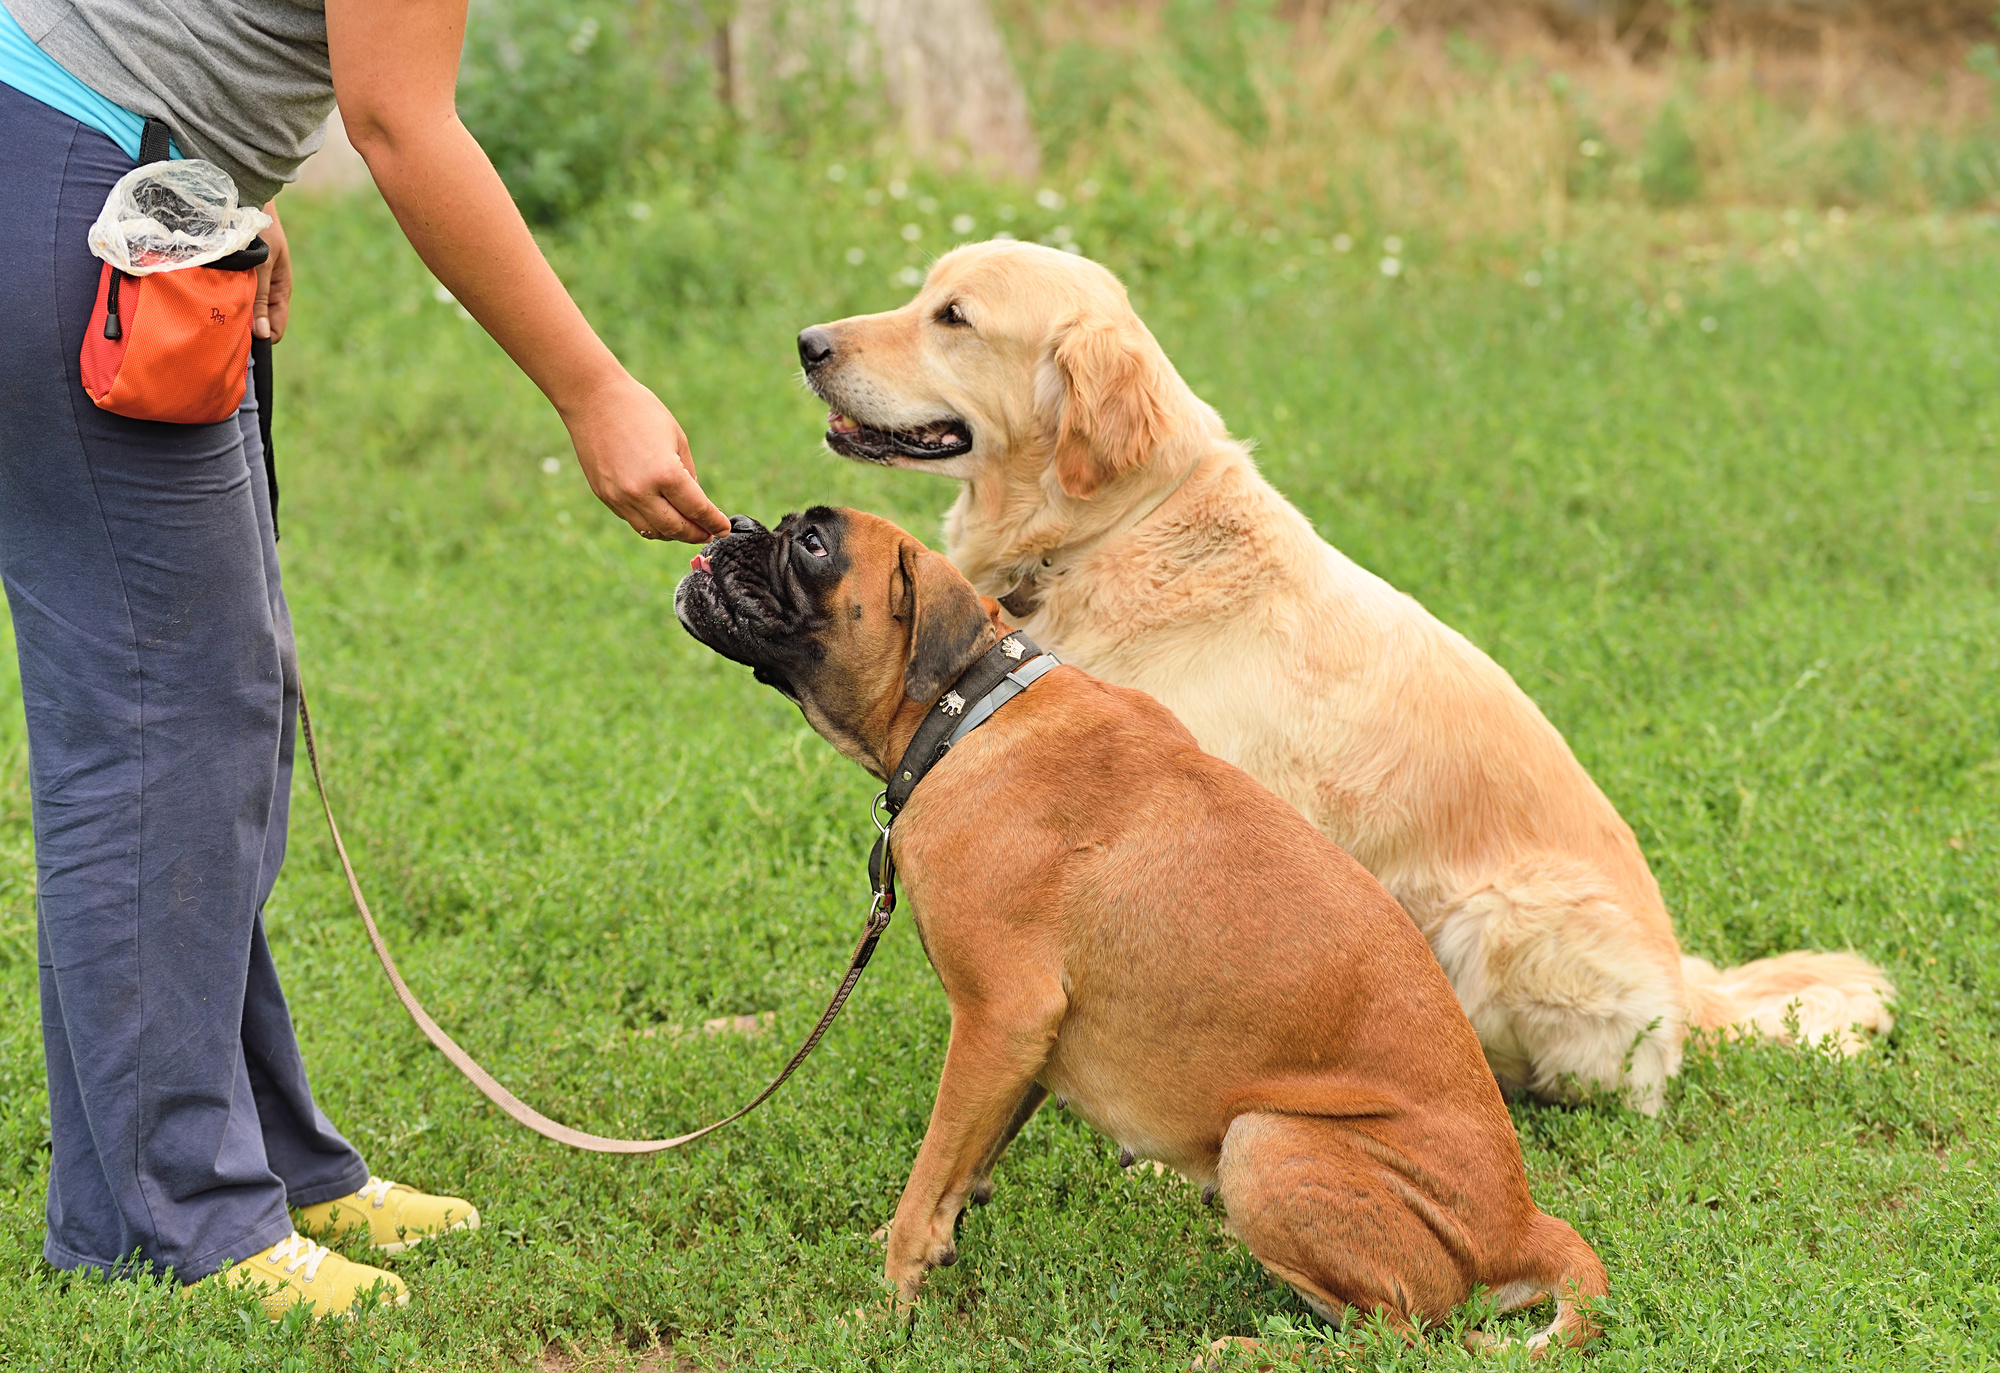 Having the right dog leash for your pet is crucial for the safety of you and the dog. Find out here how to buy the perfect dog leash for your furry friend.